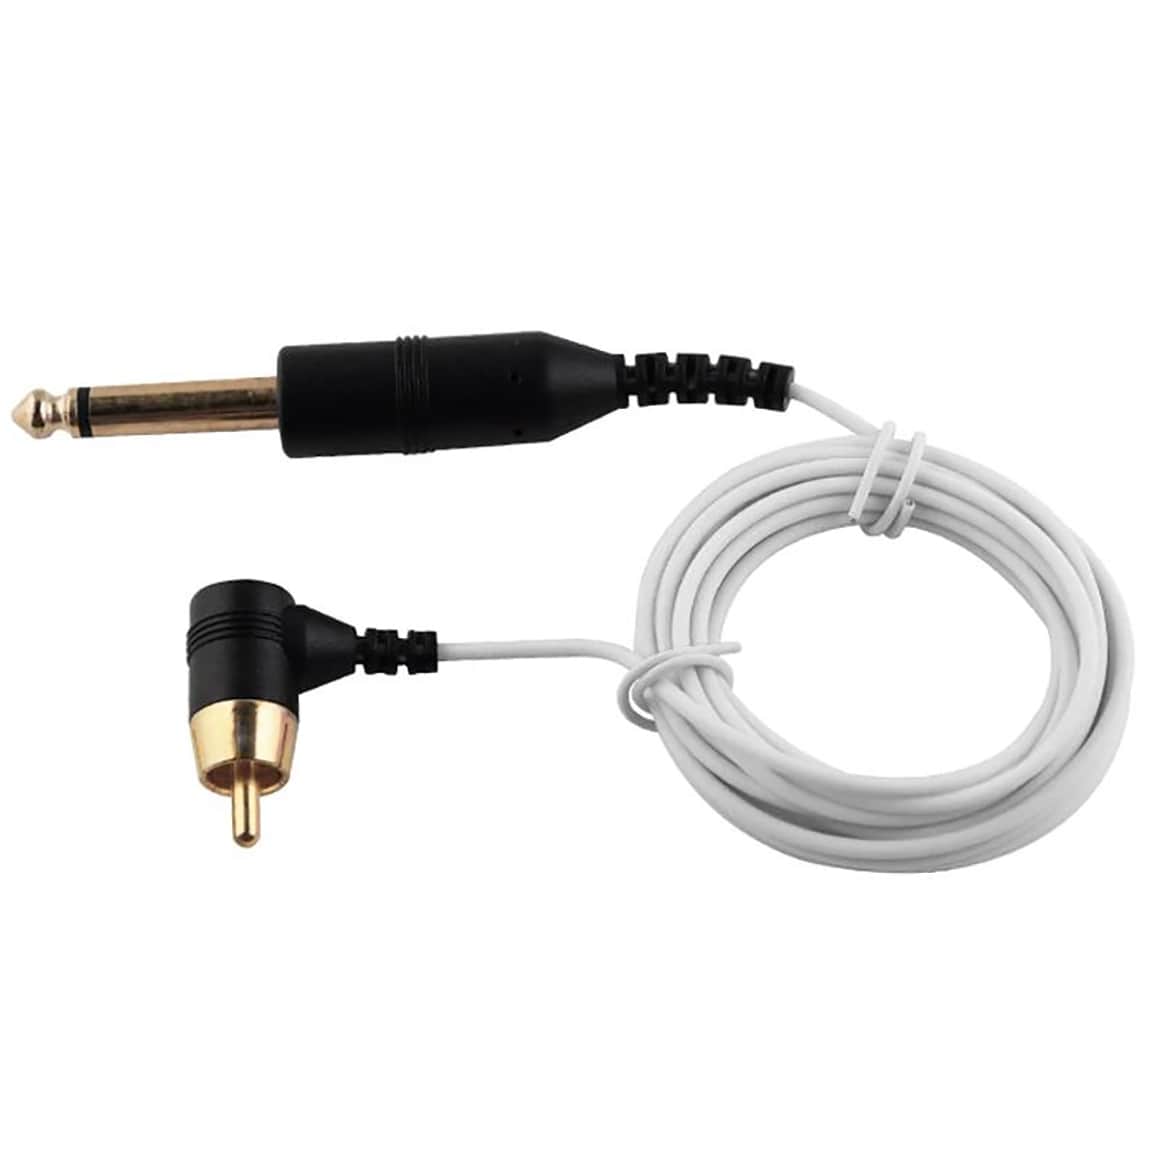 FYT Premium Gold Plated RCA Cable - 8FT - Power Supplies & Accessory - Mithra Tattoo Supplies Canada